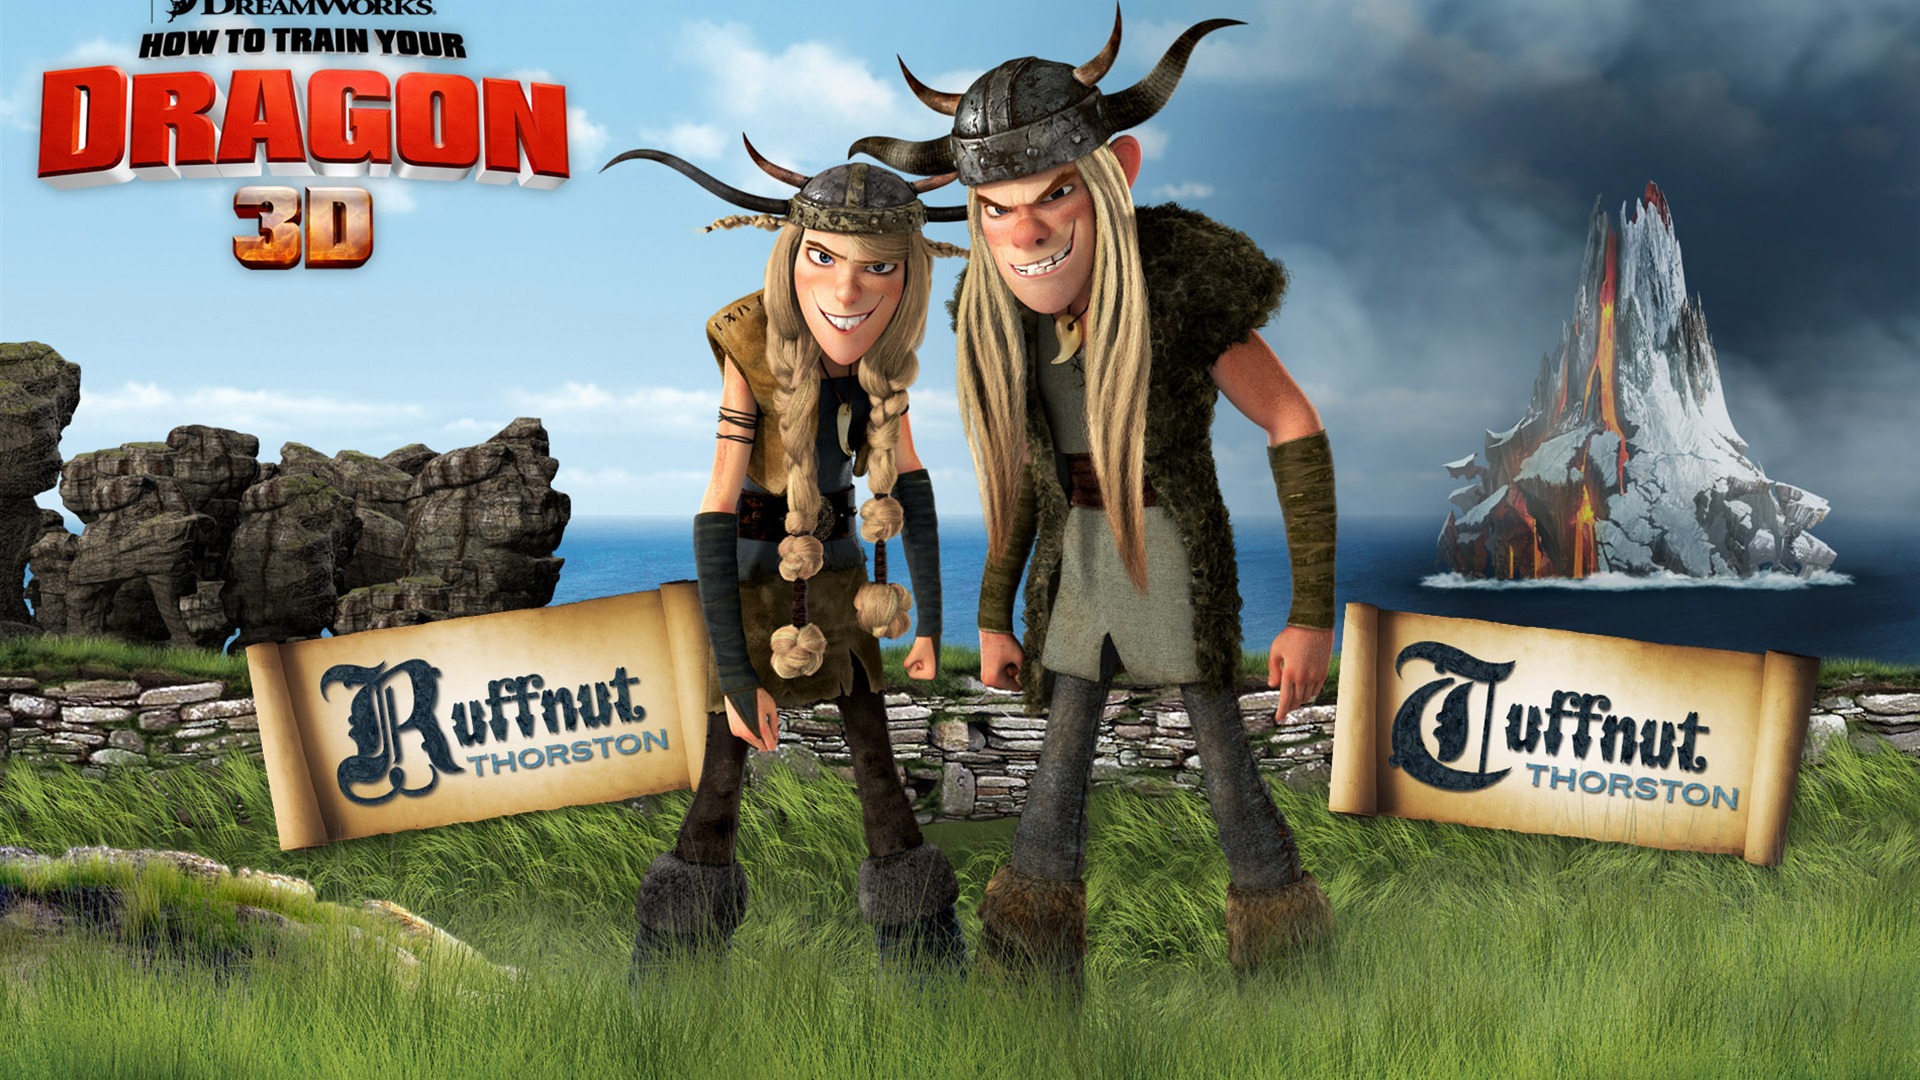 How to Train Your Dragon HD wallpaper #20 - 1920x1080